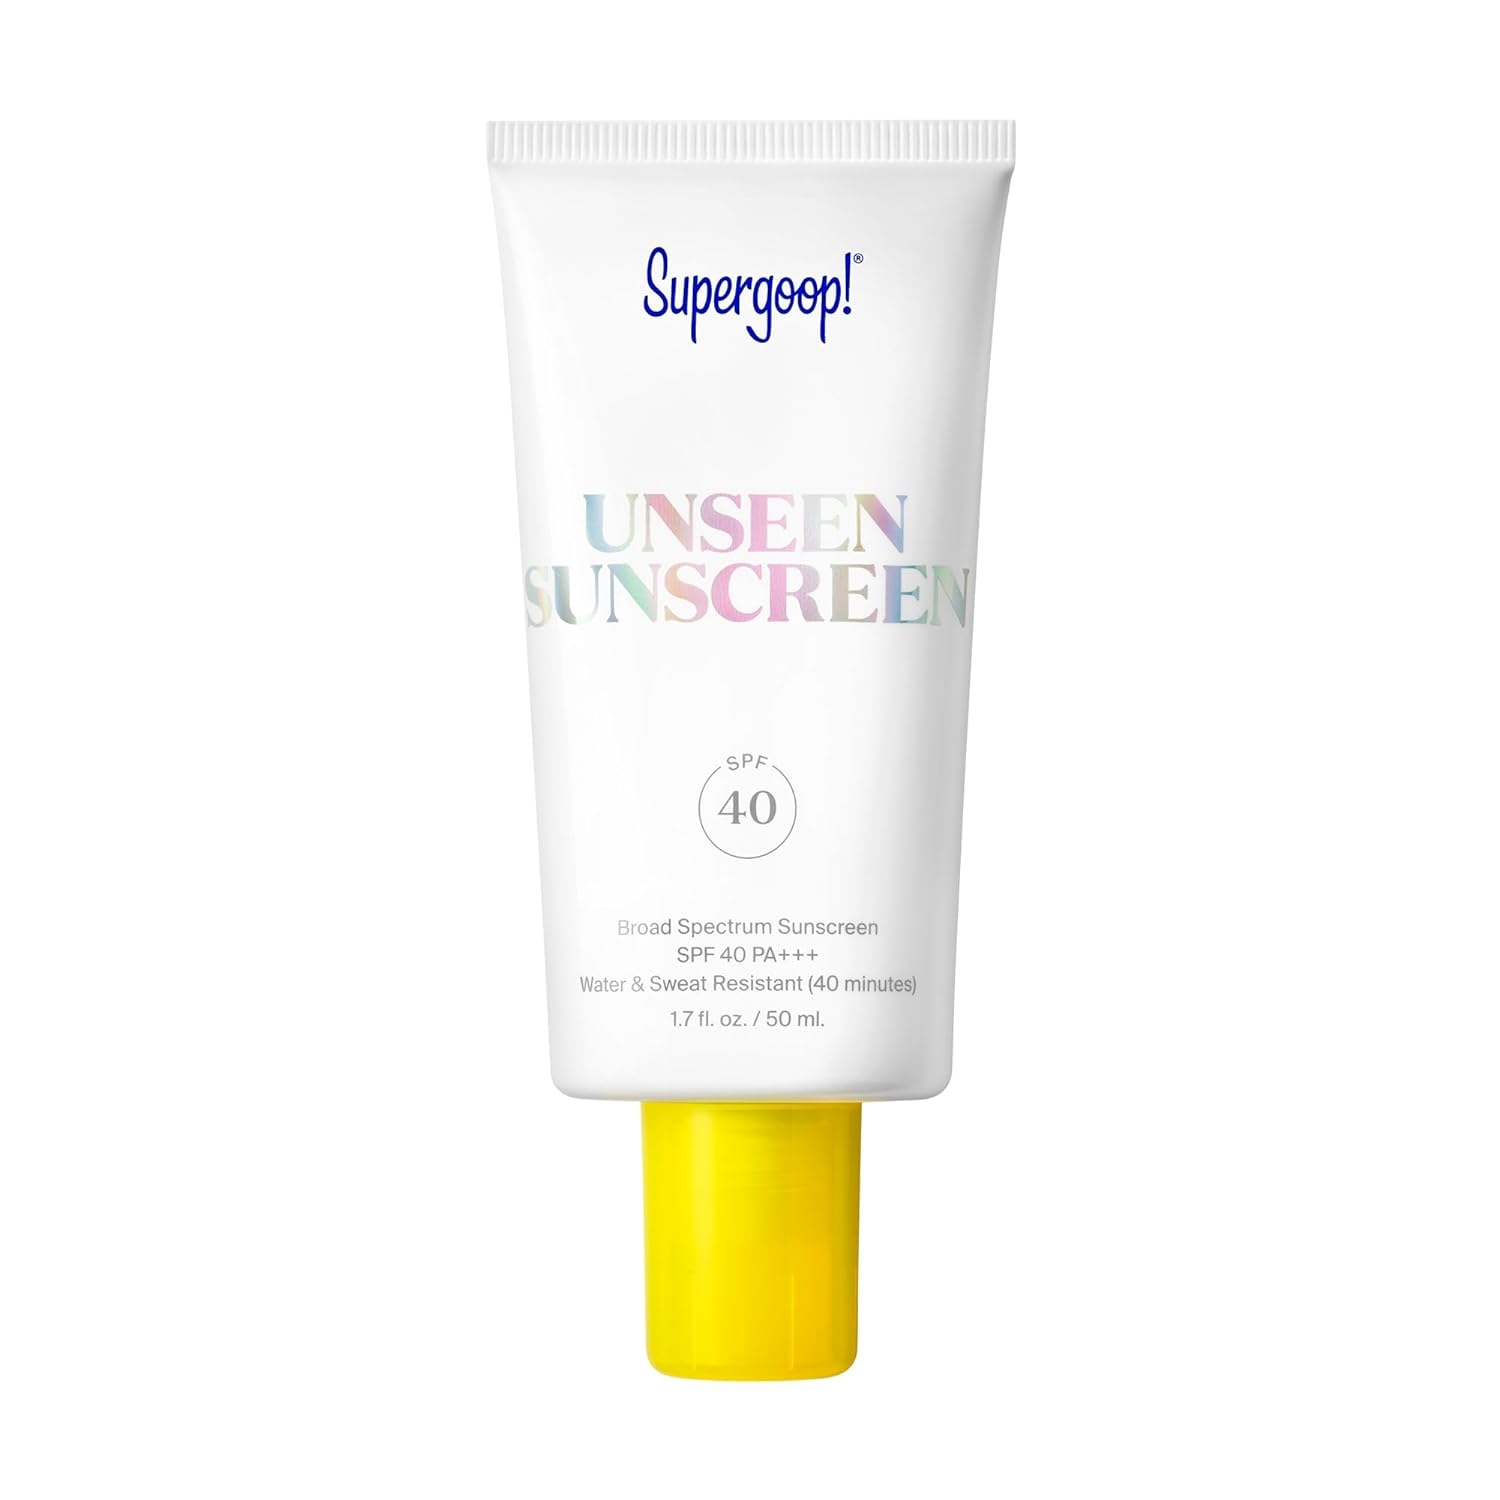 GAME-CHANGING SUNSCREEN - Our most popular SPF, Unseen Sunscreen is a totally invisible, weightless, scentless formula that provides oil-free sunscreen protection for all skin types, tones, & lifestyles.
COMPREHENSIVE PROTECTION - This feel-good, antioxidant-rich facial sunscreen helps filter blue light (skin-damaging light emitted from your phone, computer, & tablet), UVA, UVB & IRA rays.
A SUPER-POWERED PRIMER - The unique oil-free formula glides onto skin, providing shine control & leaving a velvety, makeup-gripping finish. Apply generously and evenly as the last step in your skincare routine and before makeup.
NOURISH & PROTECT SKIN - Our oxybenzone- & octinoxate-free everyday sunscreen includes clean, powerful ingredients like soothing frankincense & hydrating meadowfoam seed that nourish & protect your skin.
GREAT FOR GUYS - This beard-friendly, broad spectrum sunscreen’s clear texture truly feels like nothing.